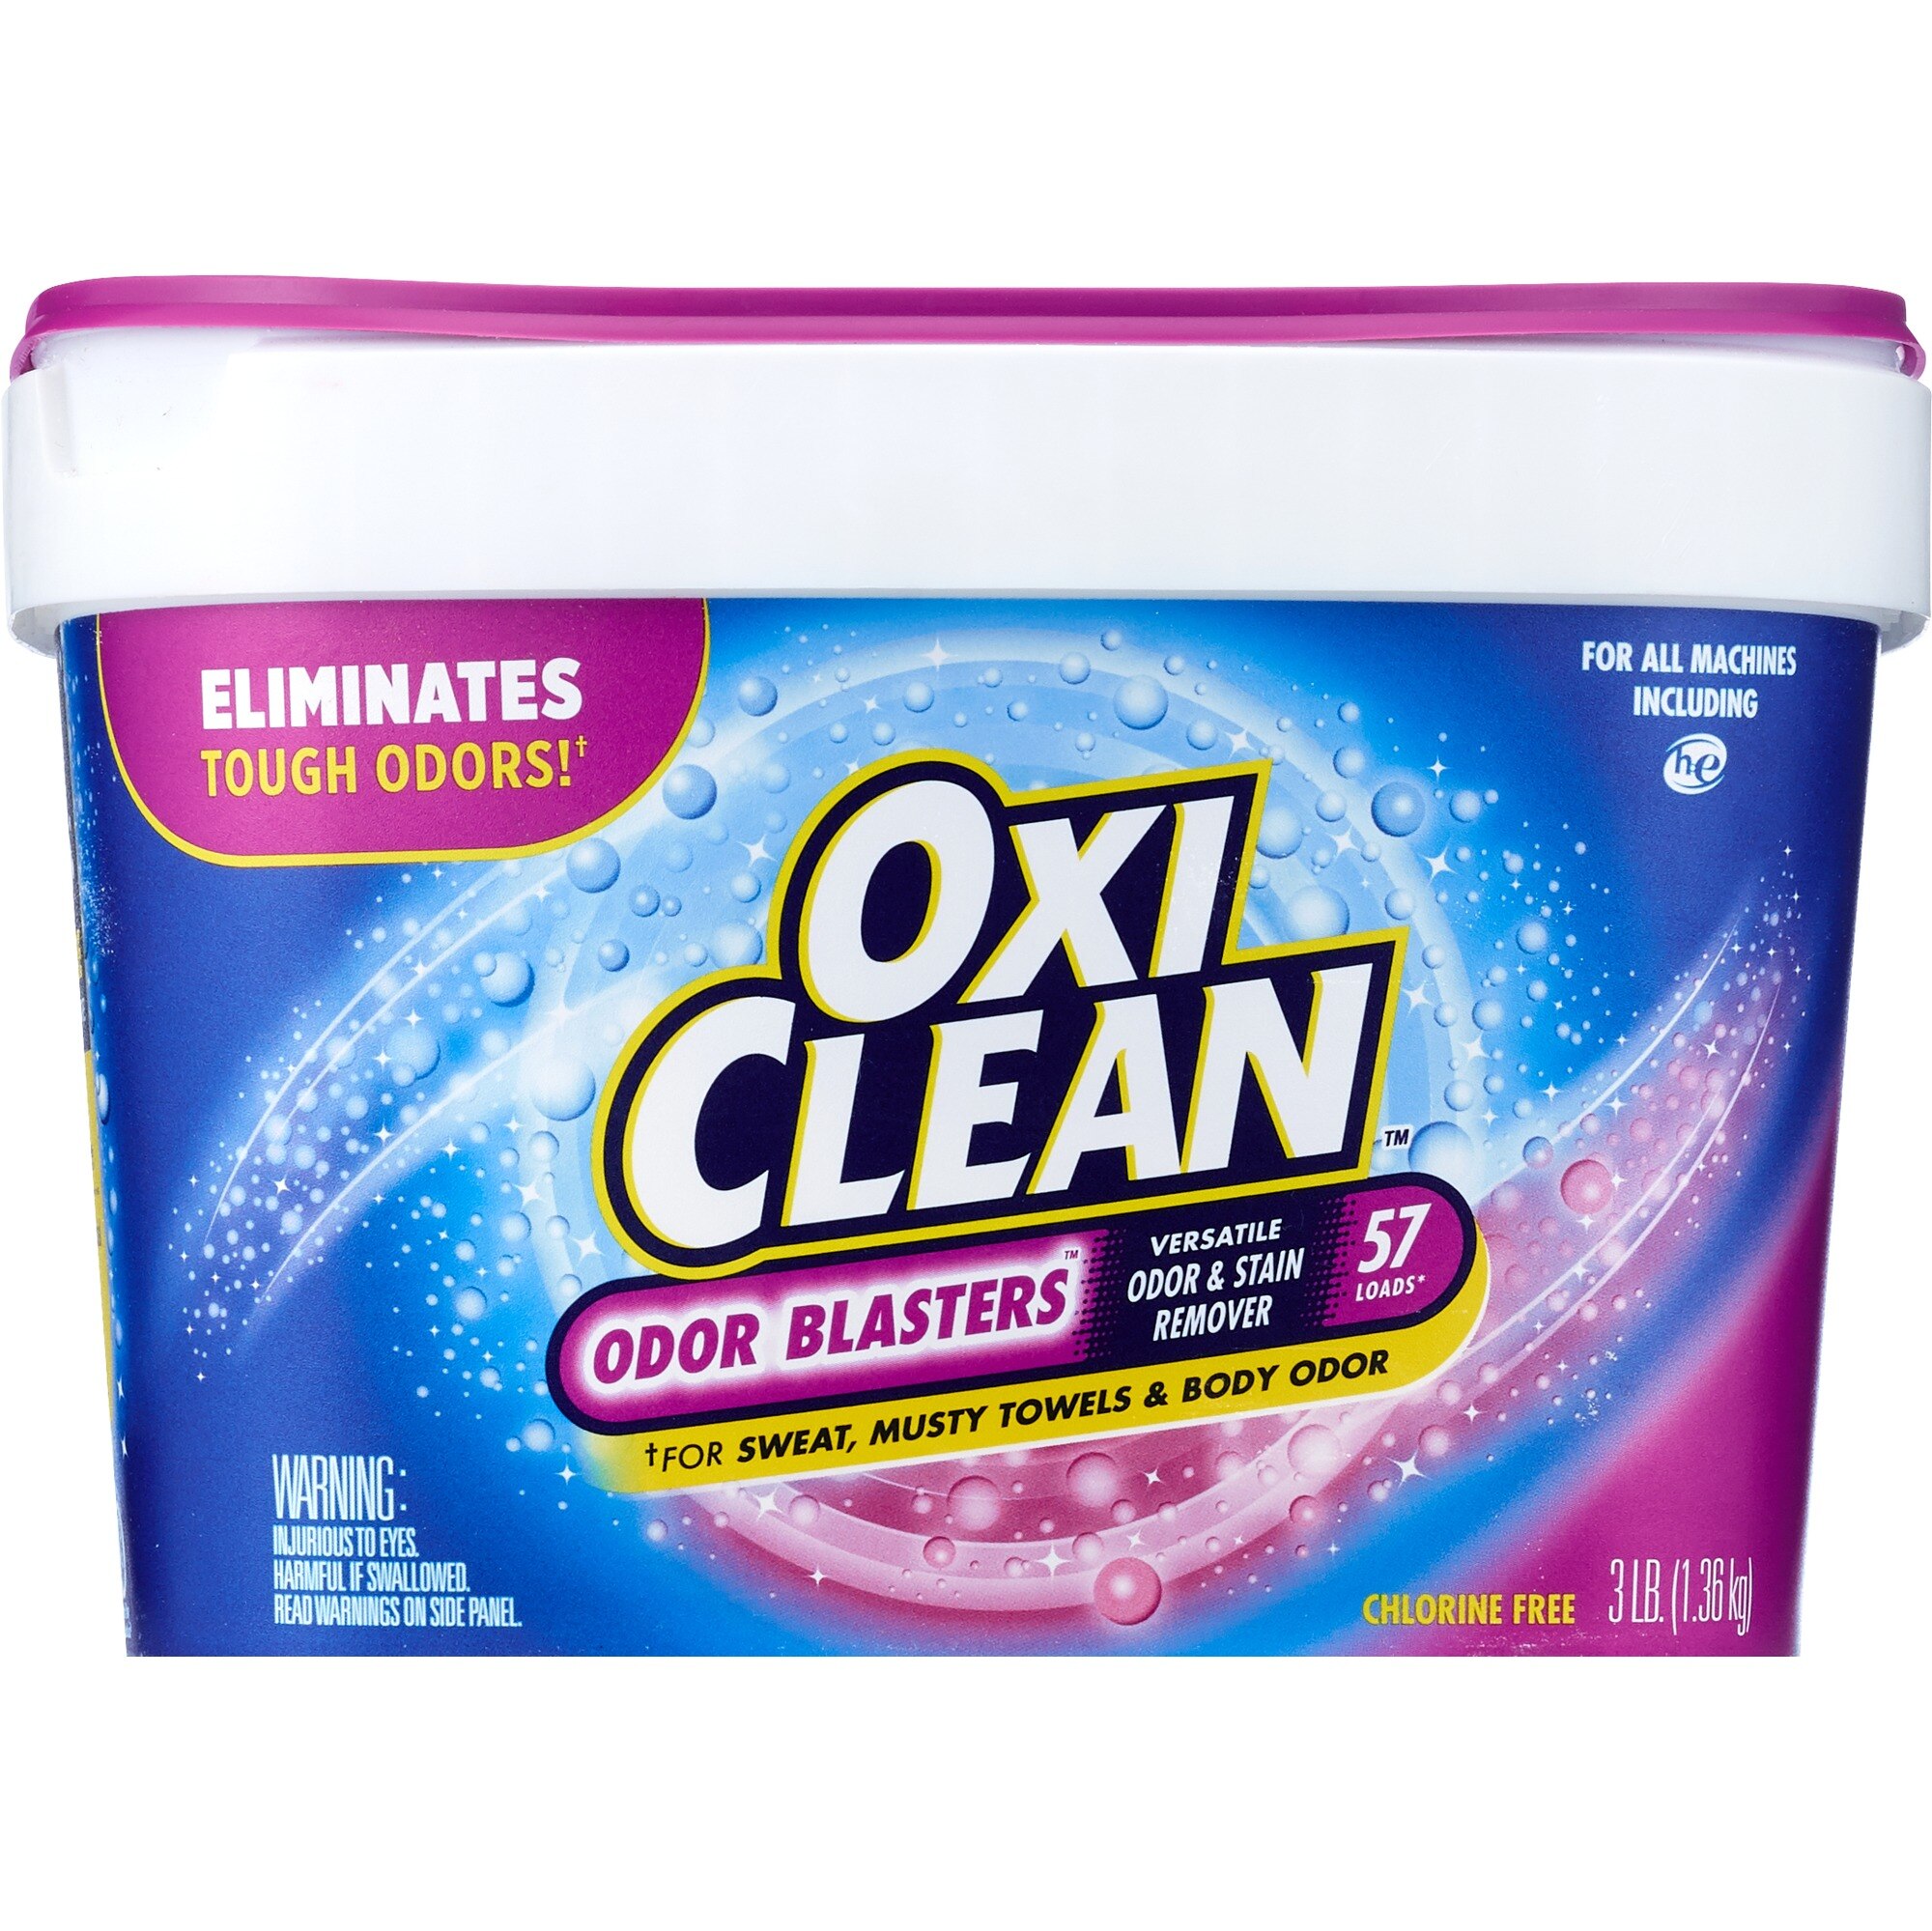 OxiClean Odor Blasters Versatile Stain Remover, 3 LB